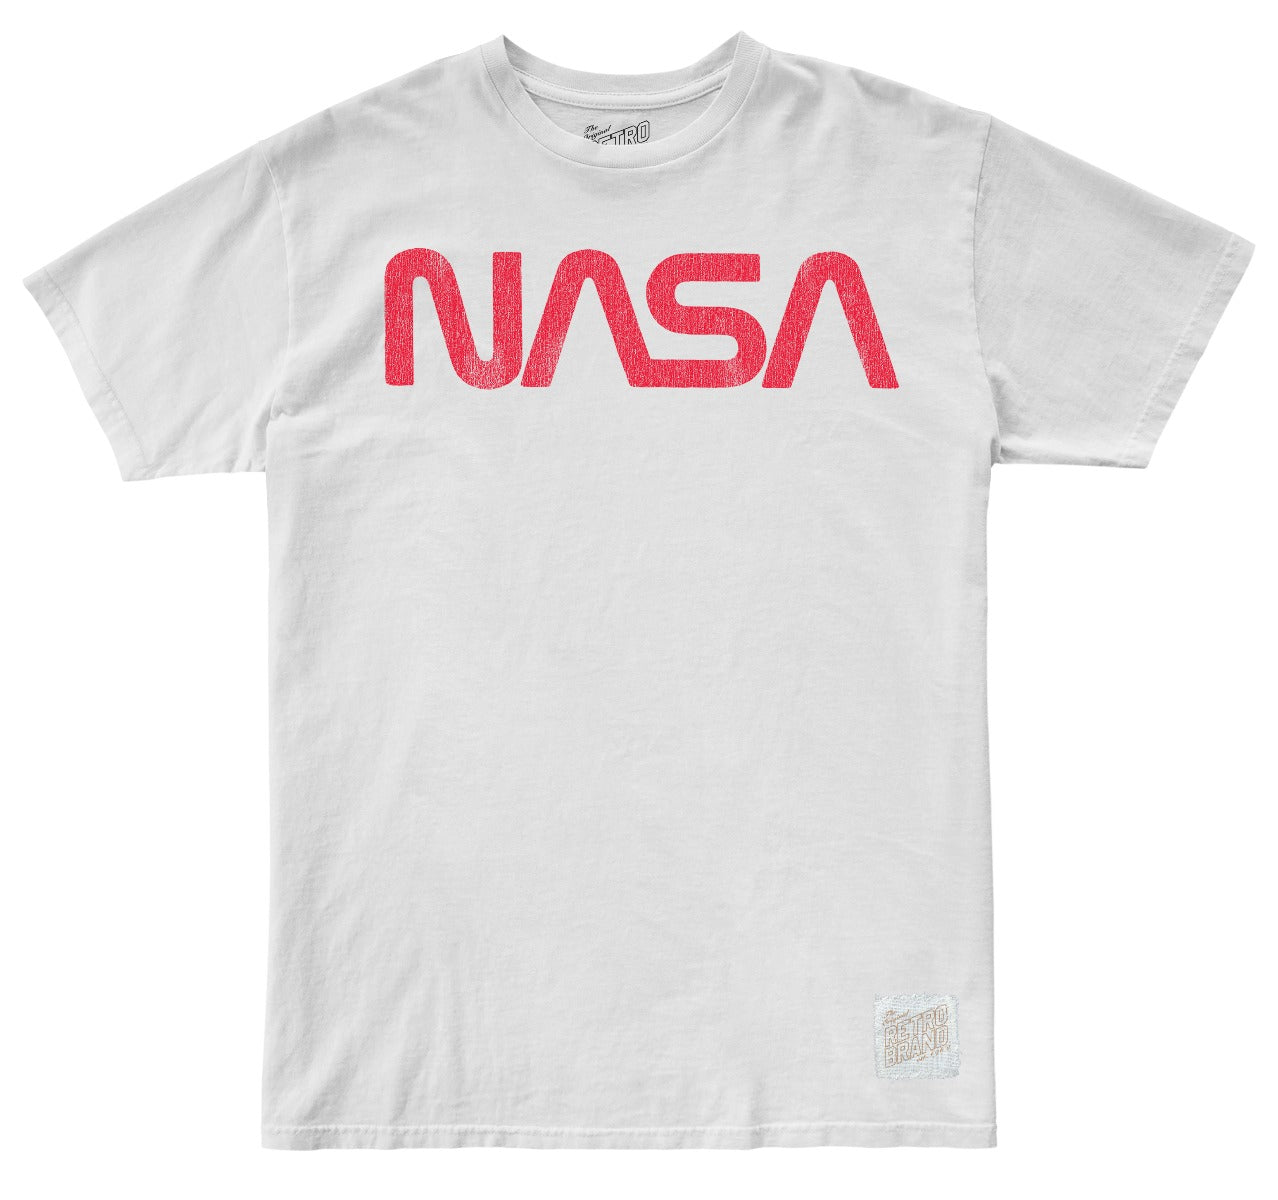 Original NASA "worm" logo in vintage red type on our 100% cotton unisex short sleeve tee in white.